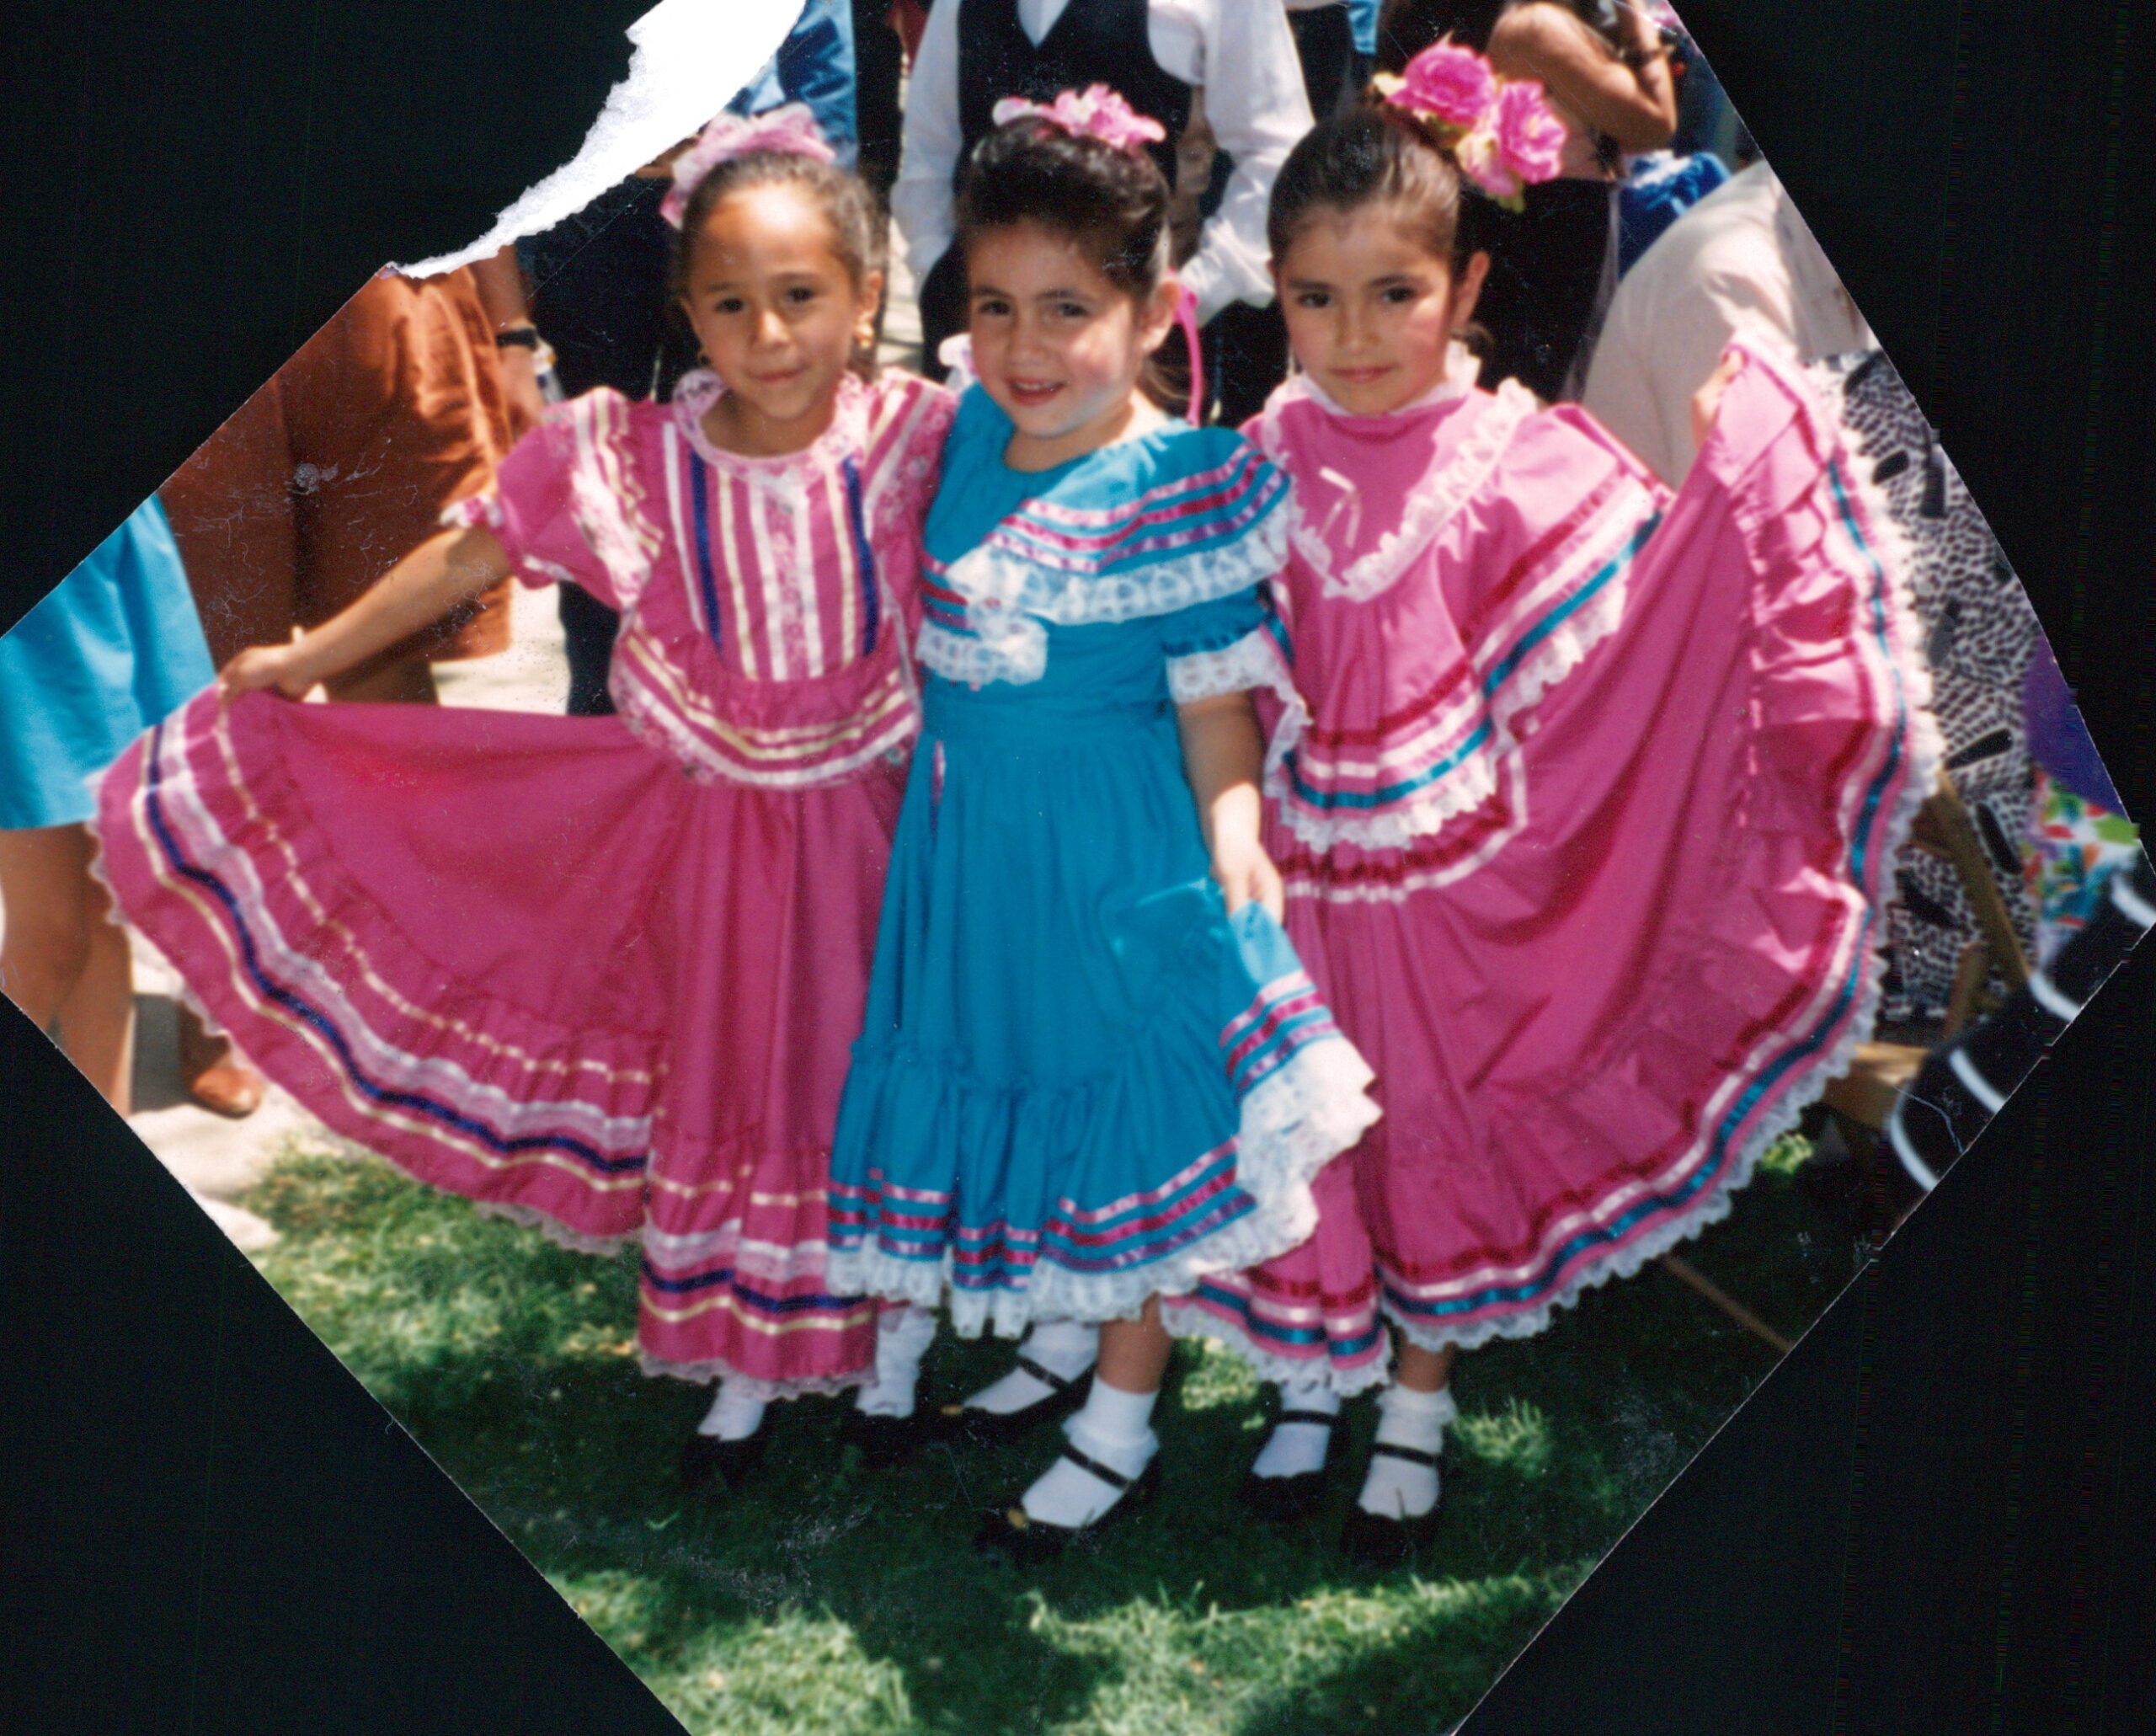 three little girls in traditional Mexican folklorico dresses